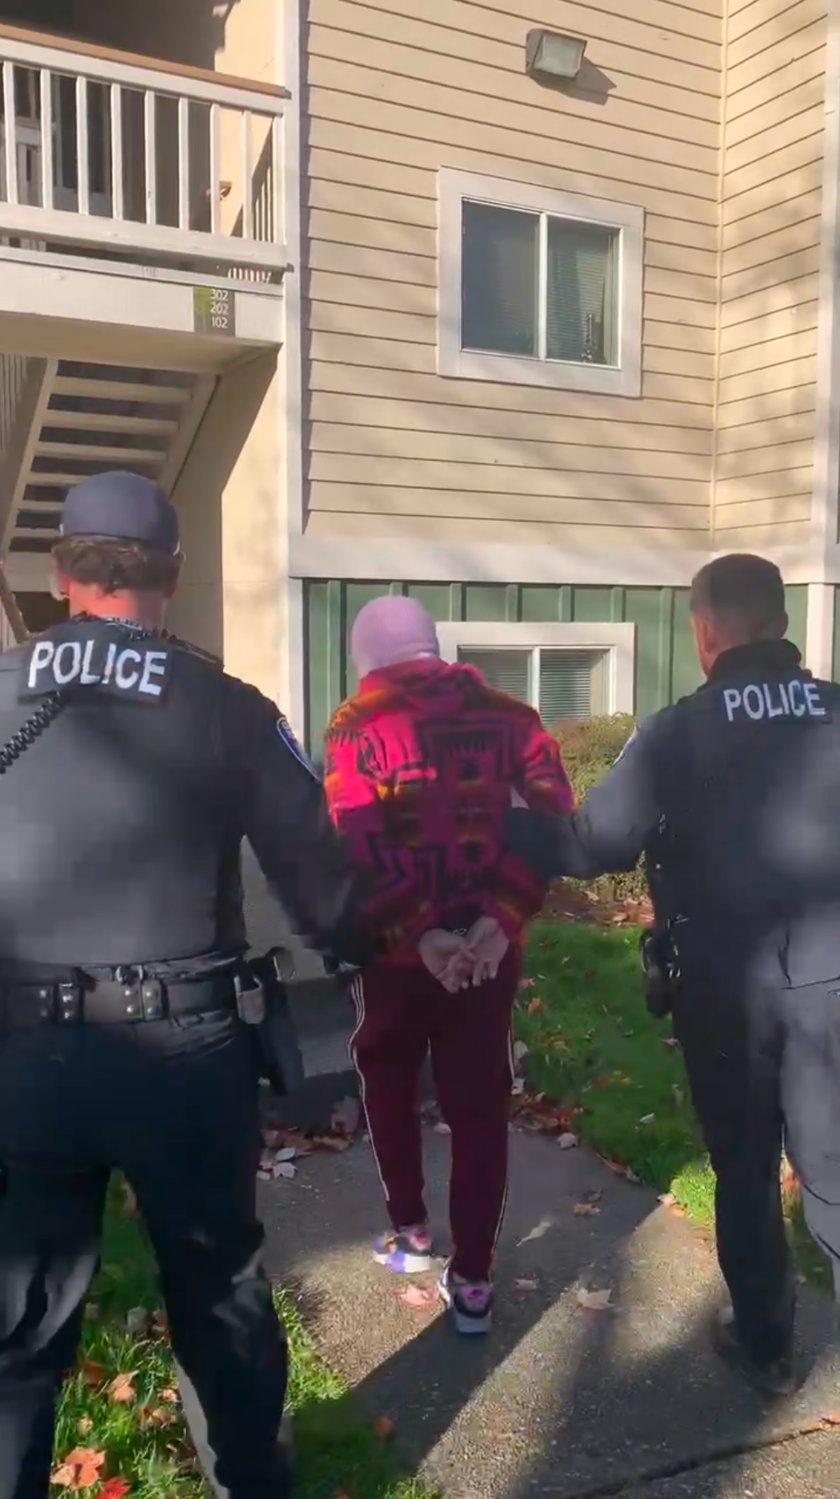 Olympia police officers escorted Isaac Hawkes-Engberts back into his apartment on Nov. 16, 2021 so they could collect the handgun they say he brandished.